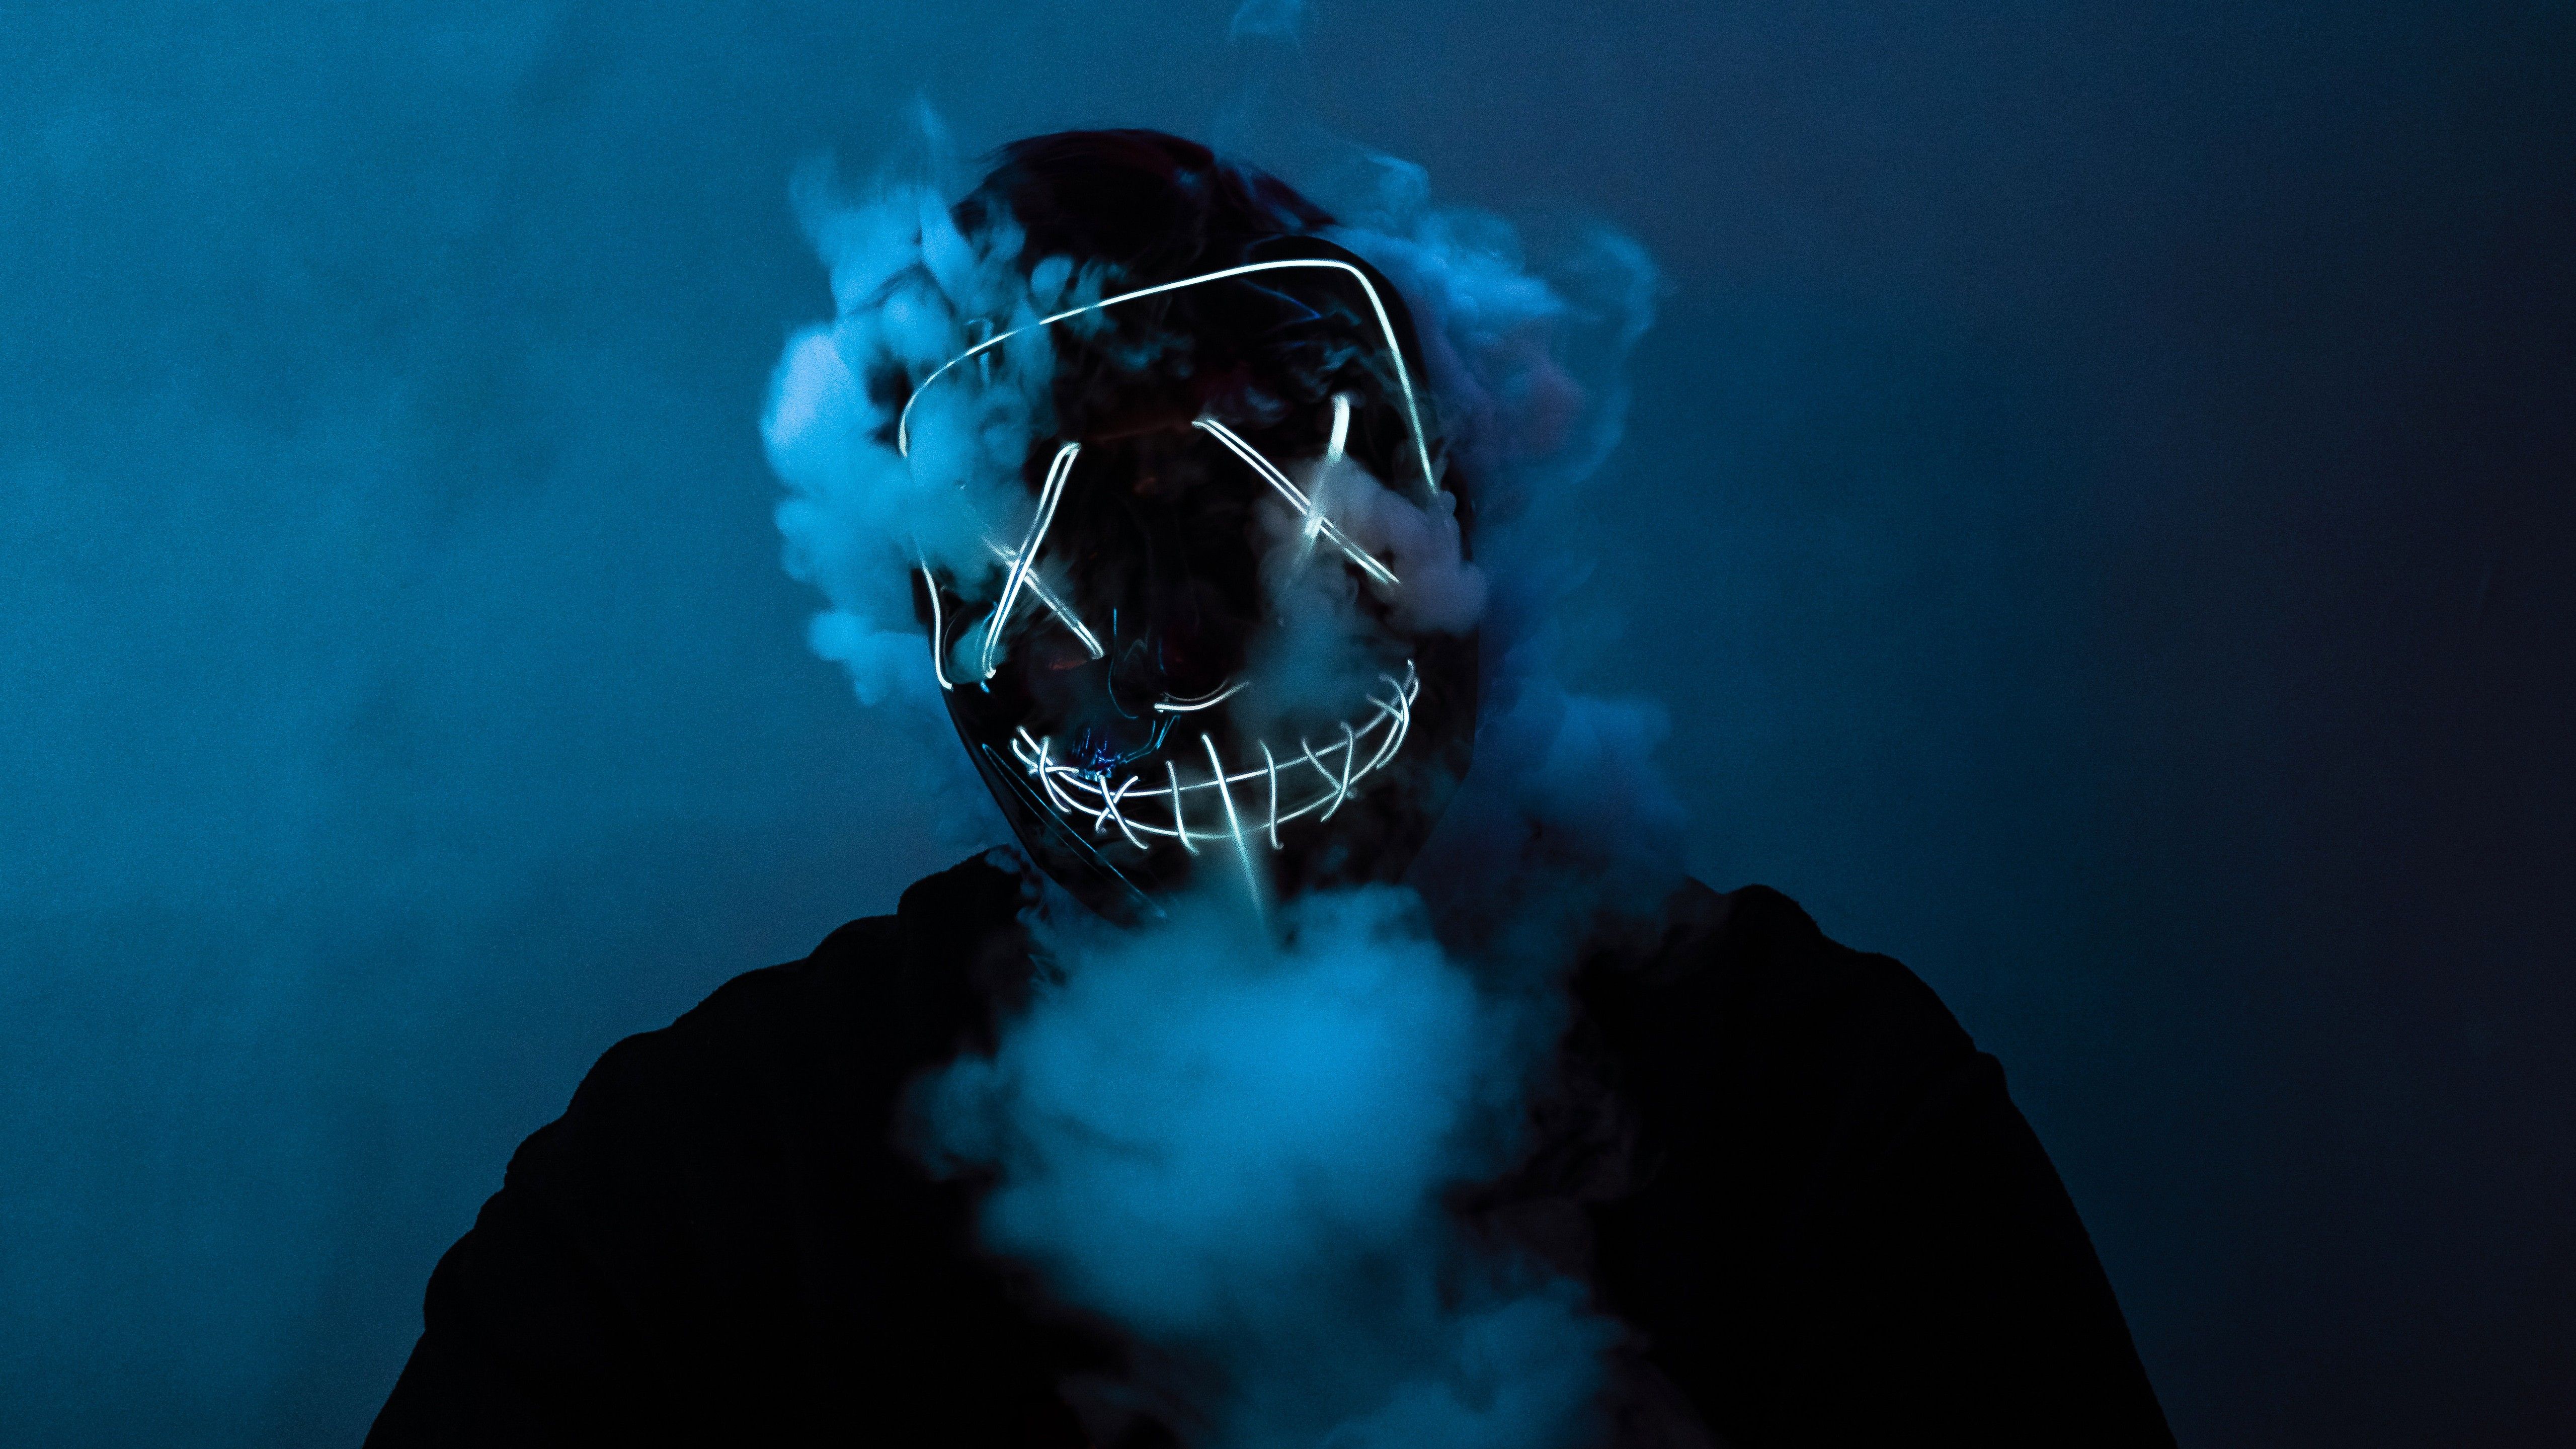 Smoke comes from under the neon mask of anonymous on the guy's face Desktop wallpapers 600x1024